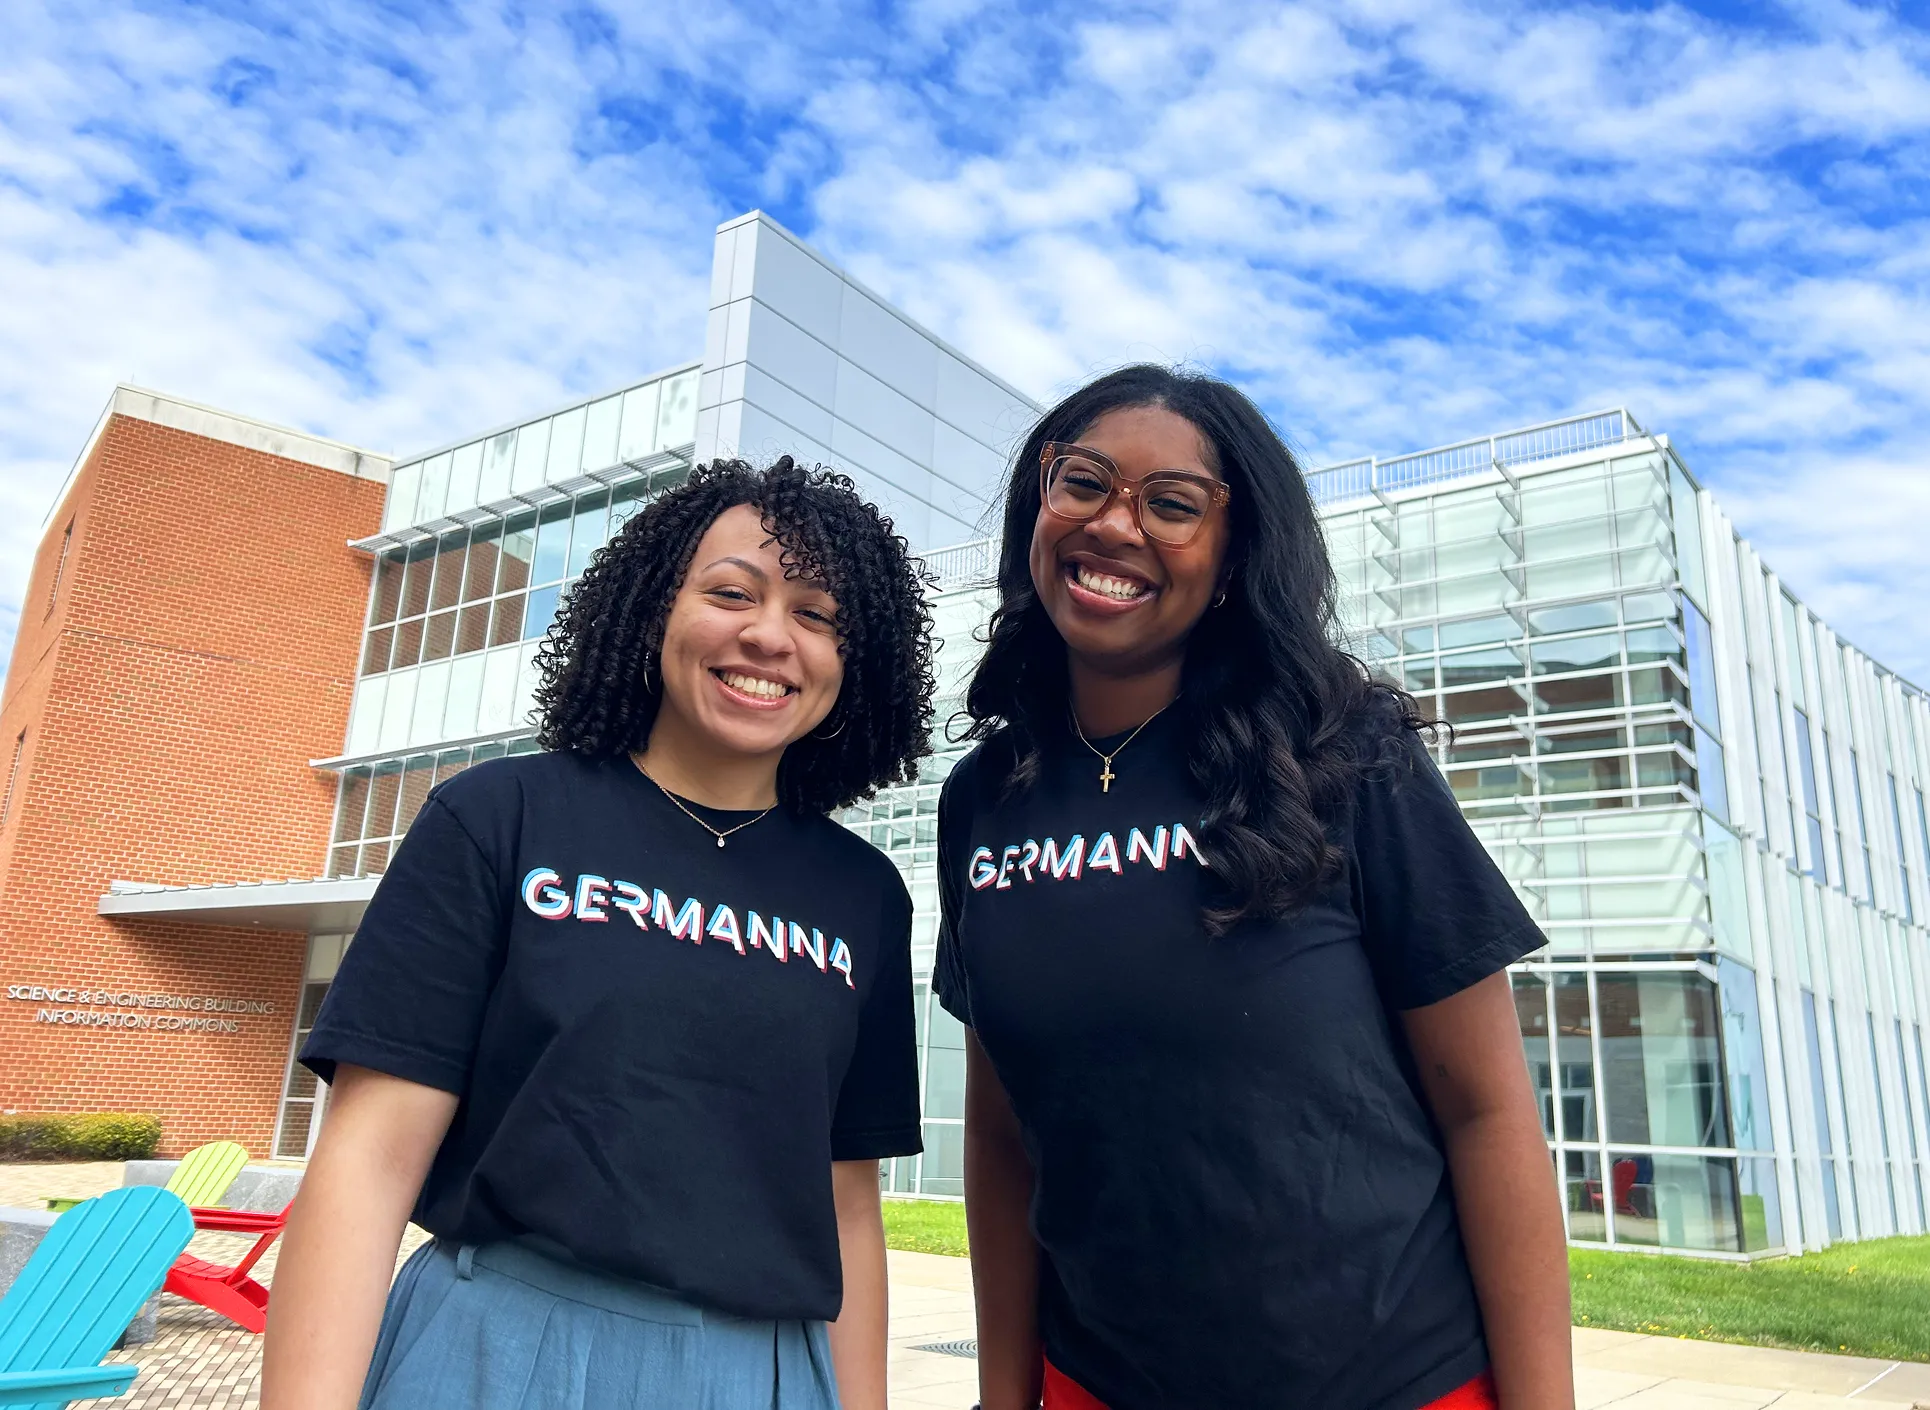 Two young women pose for the camera on the Germanna campus